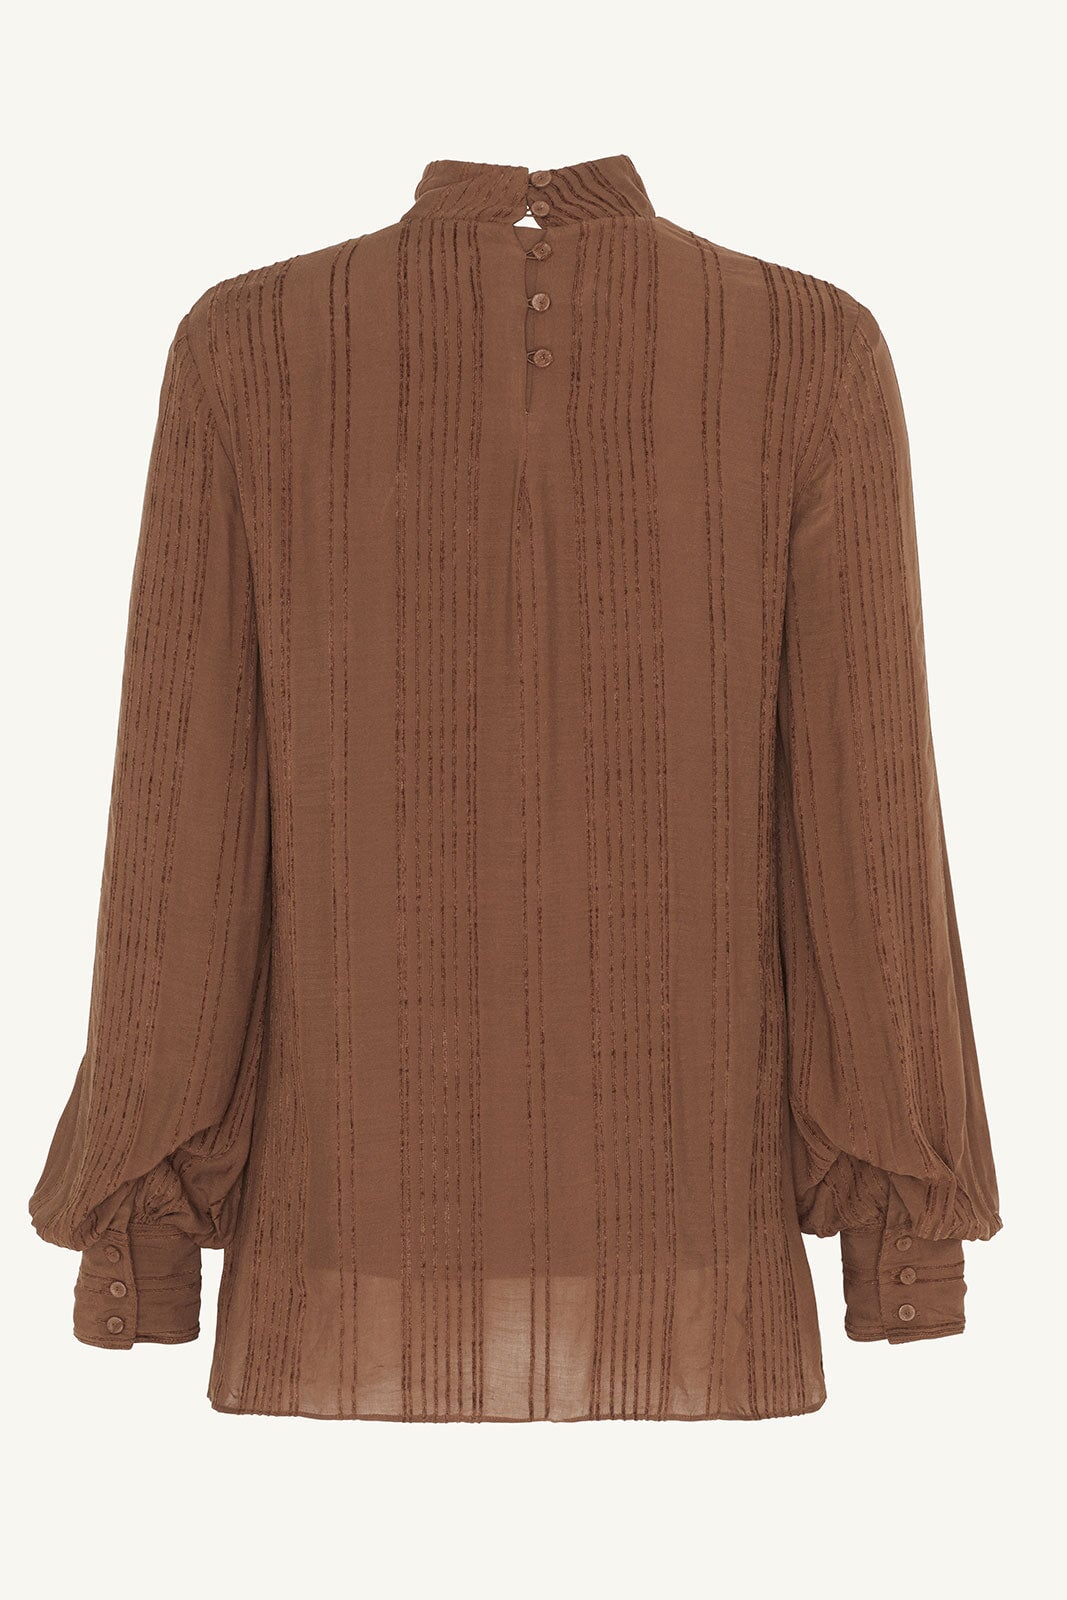 Textured Rayon Balloon Sleeve Blouse - Brown Cocoa Clothing Veiled Collection 